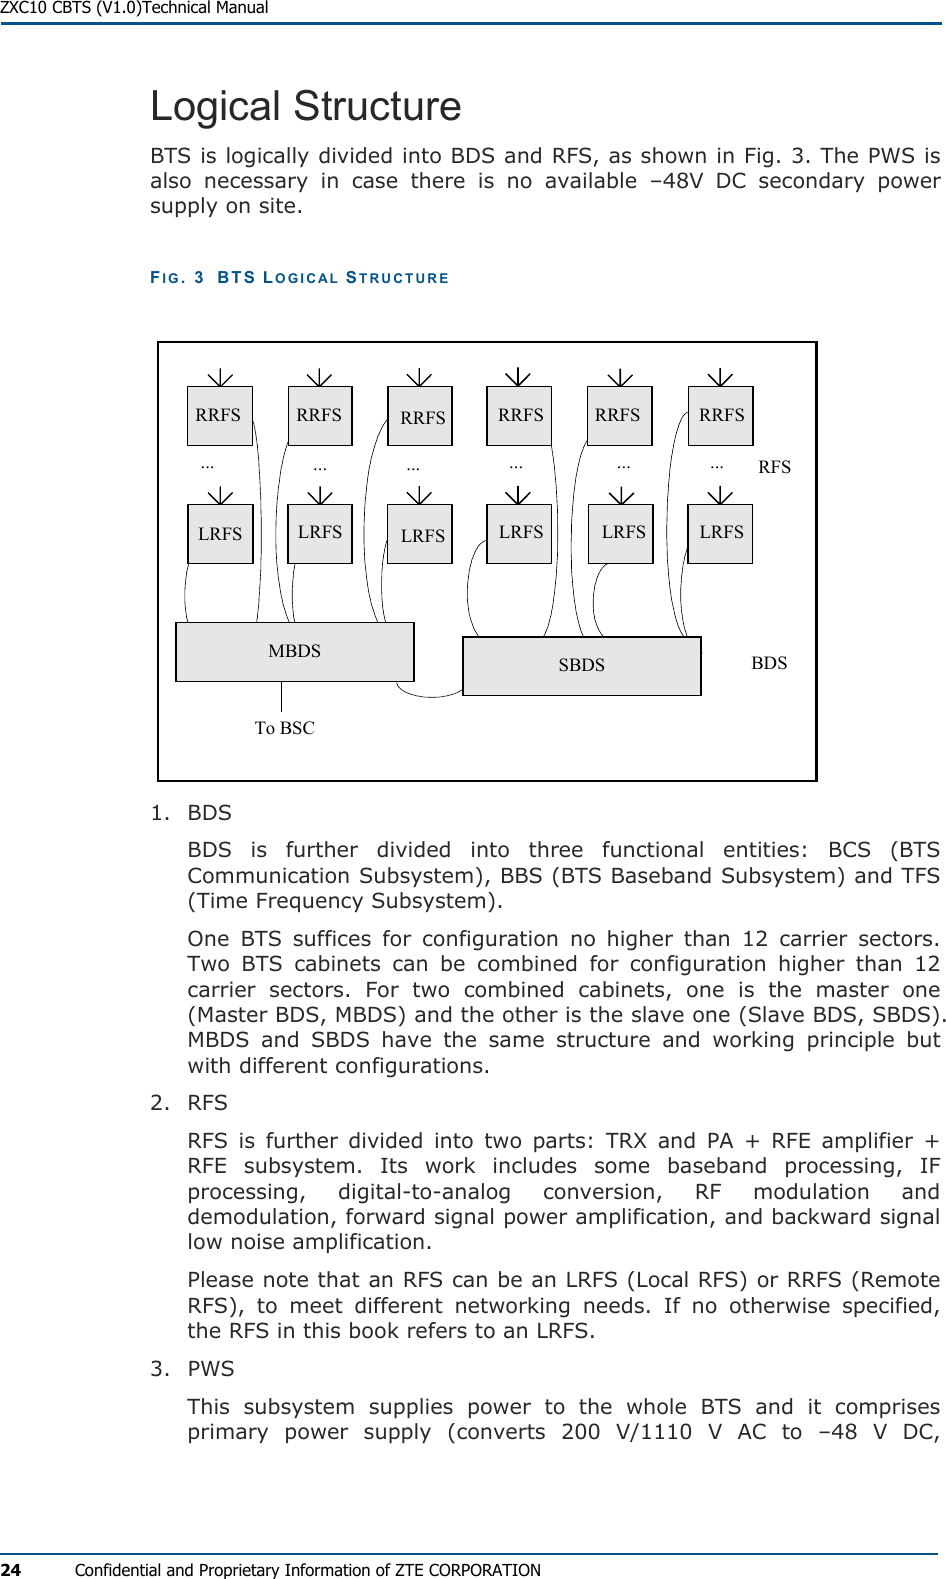  ZXC10 CBTS (V1.0)Technical Manual 24  Confidential and Proprietary Information of ZTE CORPORATION Logical Structure BTS is logically divided into BDS and RFS, as shown in Fig. 3. The PWS is also necessary in case there is no available –48V DC secondary power supply on site.  FIG. 3  BTS LOGICAL STRUCTURE SBDSTo BSCRFSBDSMBDSRRFSLRFSSBDSLRFS LRFS LRFS LRFS LRFSRRFS RRFS RRFS RRFS RRFS...... ... ... ... ...MBDS SBDSRRFSRRFS 1. BDS BDS is further divided into three functional entities: BCS (BTS Communication Subsystem), BBS (BTS Baseband Subsystem) and TFS (Time Frequency Subsystem).  One BTS suffices for configuration no higher than 12 carrier sectors. Two BTS cabinets can be combined for configuration higher than 12 carrier sectors. For two combined cabinets, one is the master one (Master BDS, MBDS) and the other is the slave one (Slave BDS, SBDS). MBDS and SBDS have the same structure and working principle but with different configurations.  2. RFS RFS is further divided into two parts: TRX and PA + RFE amplifier + RFE subsystem. Its work includes some baseband processing, IF processing, digital-to-analog conversion, RF modulation and demodulation, forward signal power amplification, and backward signal low noise amplification.  Please note that an RFS can be an LRFS (Local RFS) or RRFS (Remote RFS), to meet different networking needs. If no otherwise specified, the RFS in this book refers to an LRFS.  3. PWS This subsystem supplies power to the whole BTS and it comprises primary power supply (converts 200 V/1110 V AC to –48 V DC, 